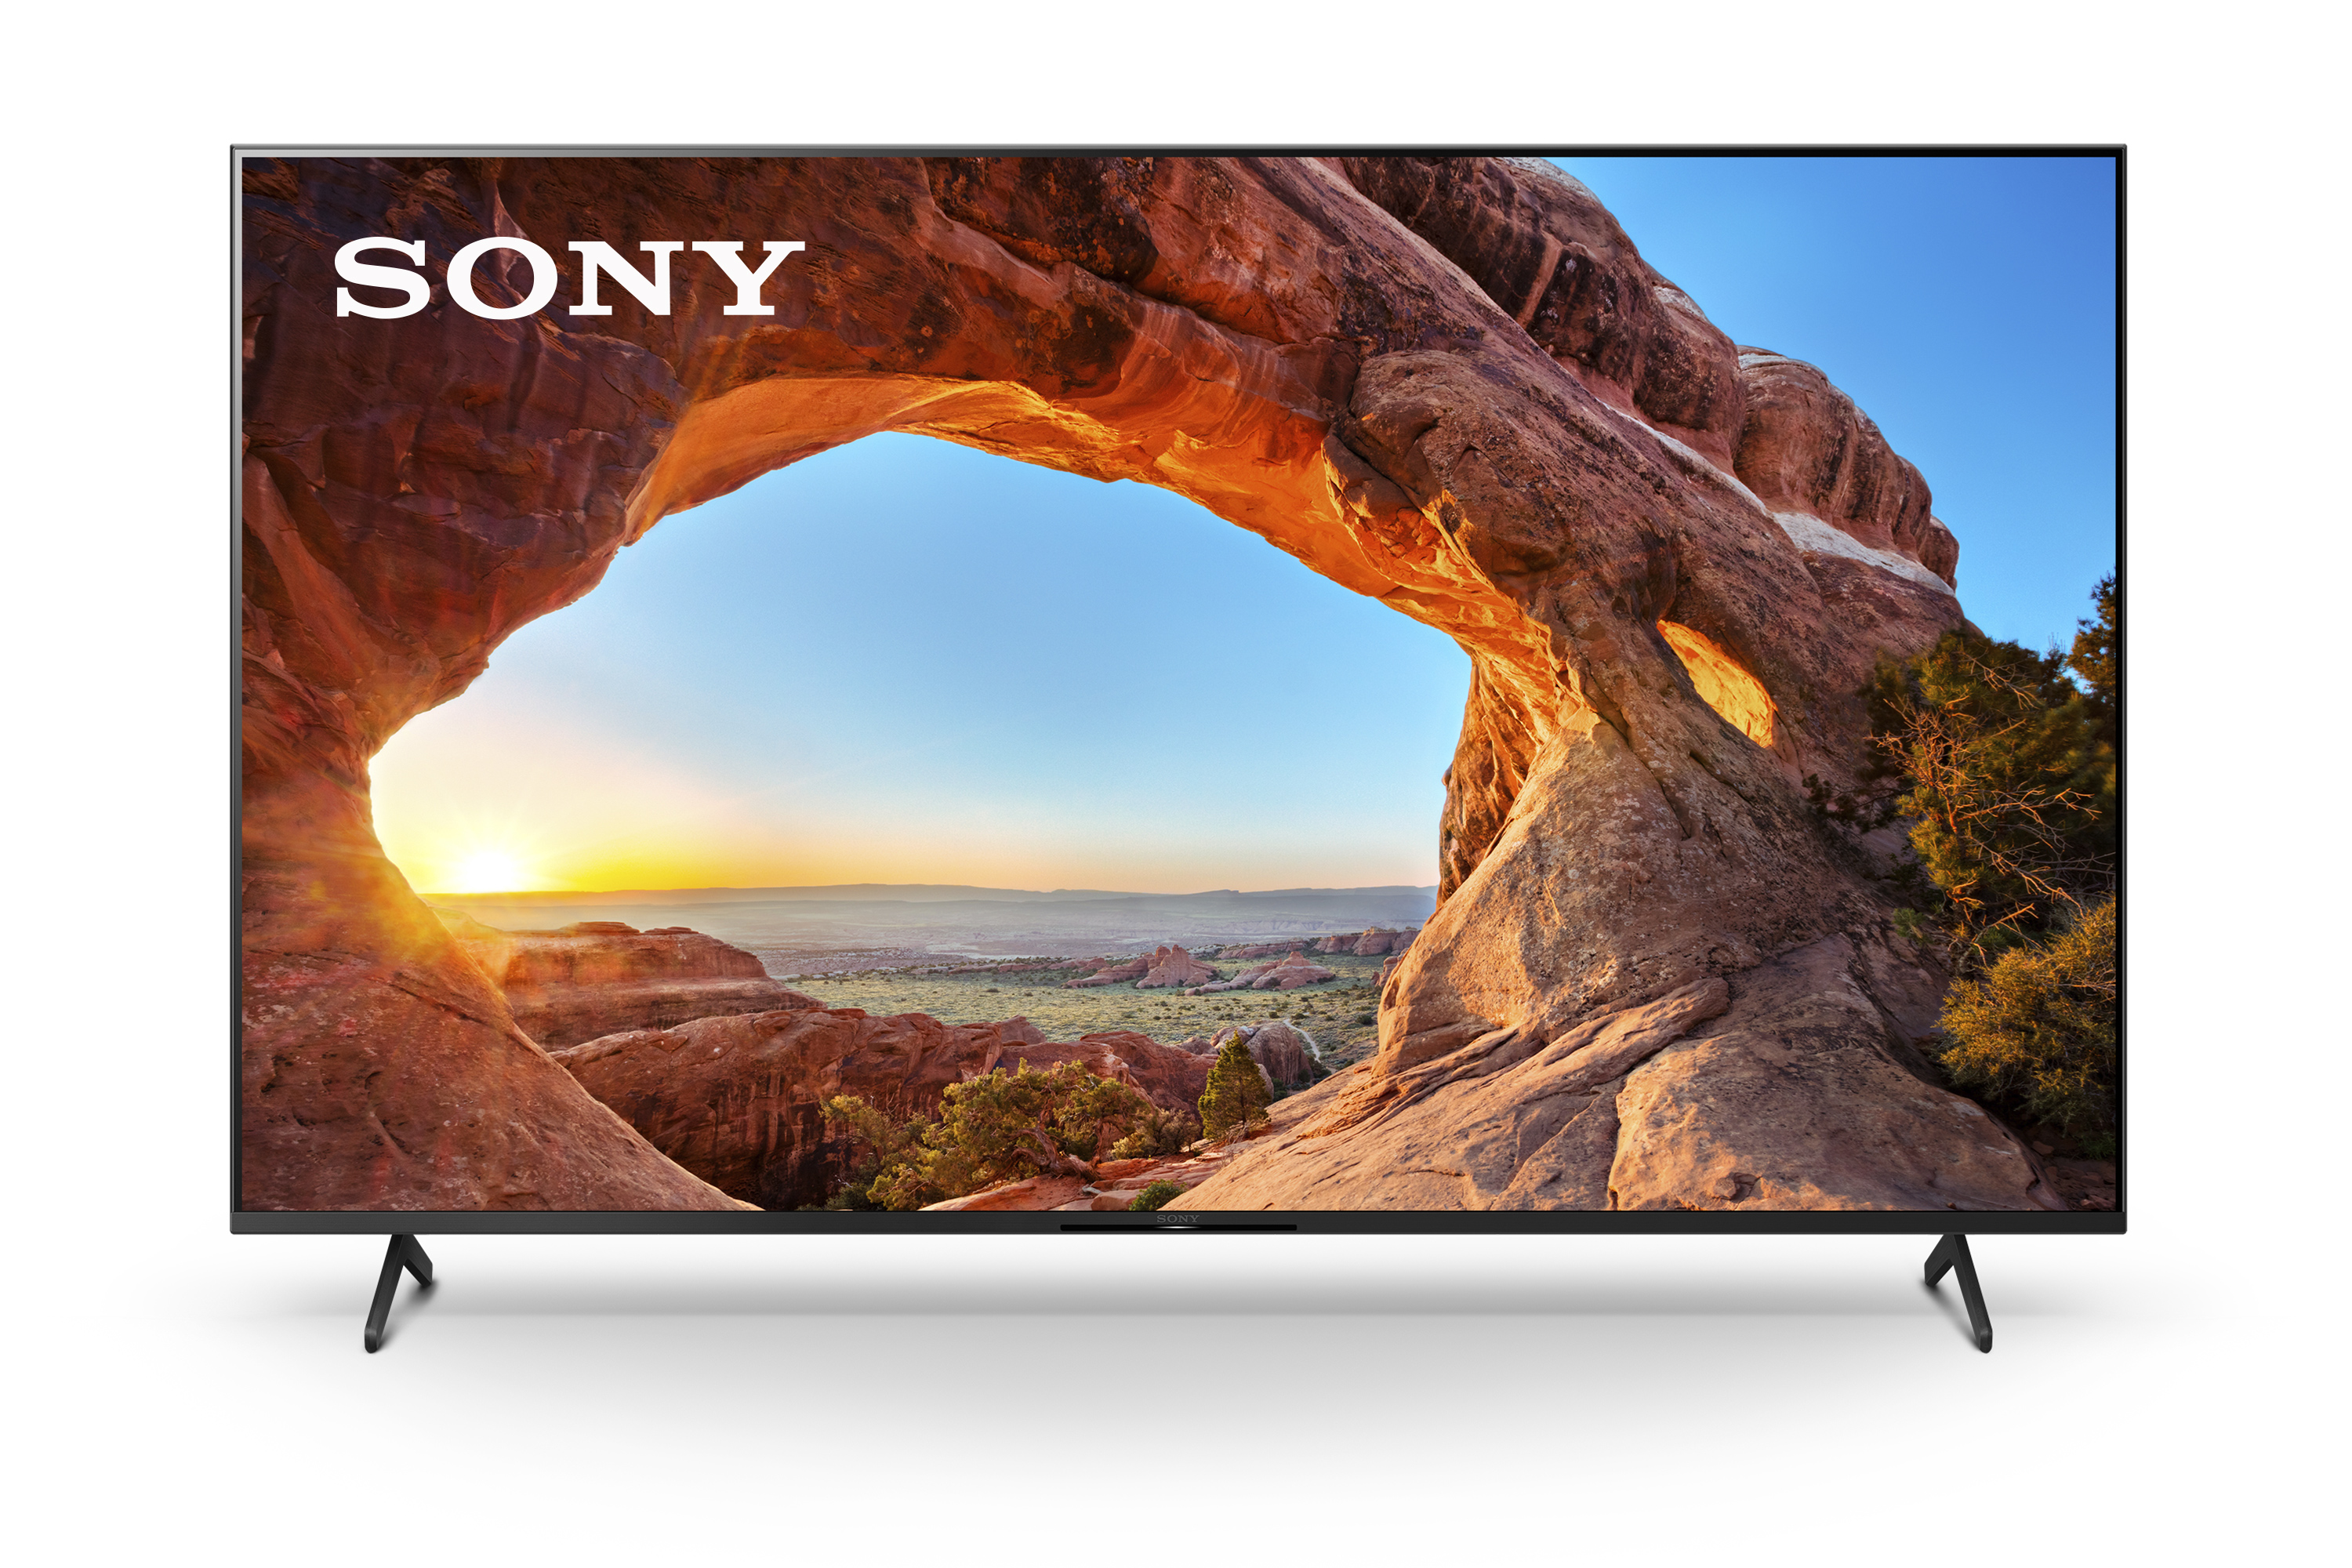 Sony 55" Class KD55X85J 4K Ultra HD LED Smart Google TV with Dolby Vision HDR X85J Series 2021 model - image 1 of 20